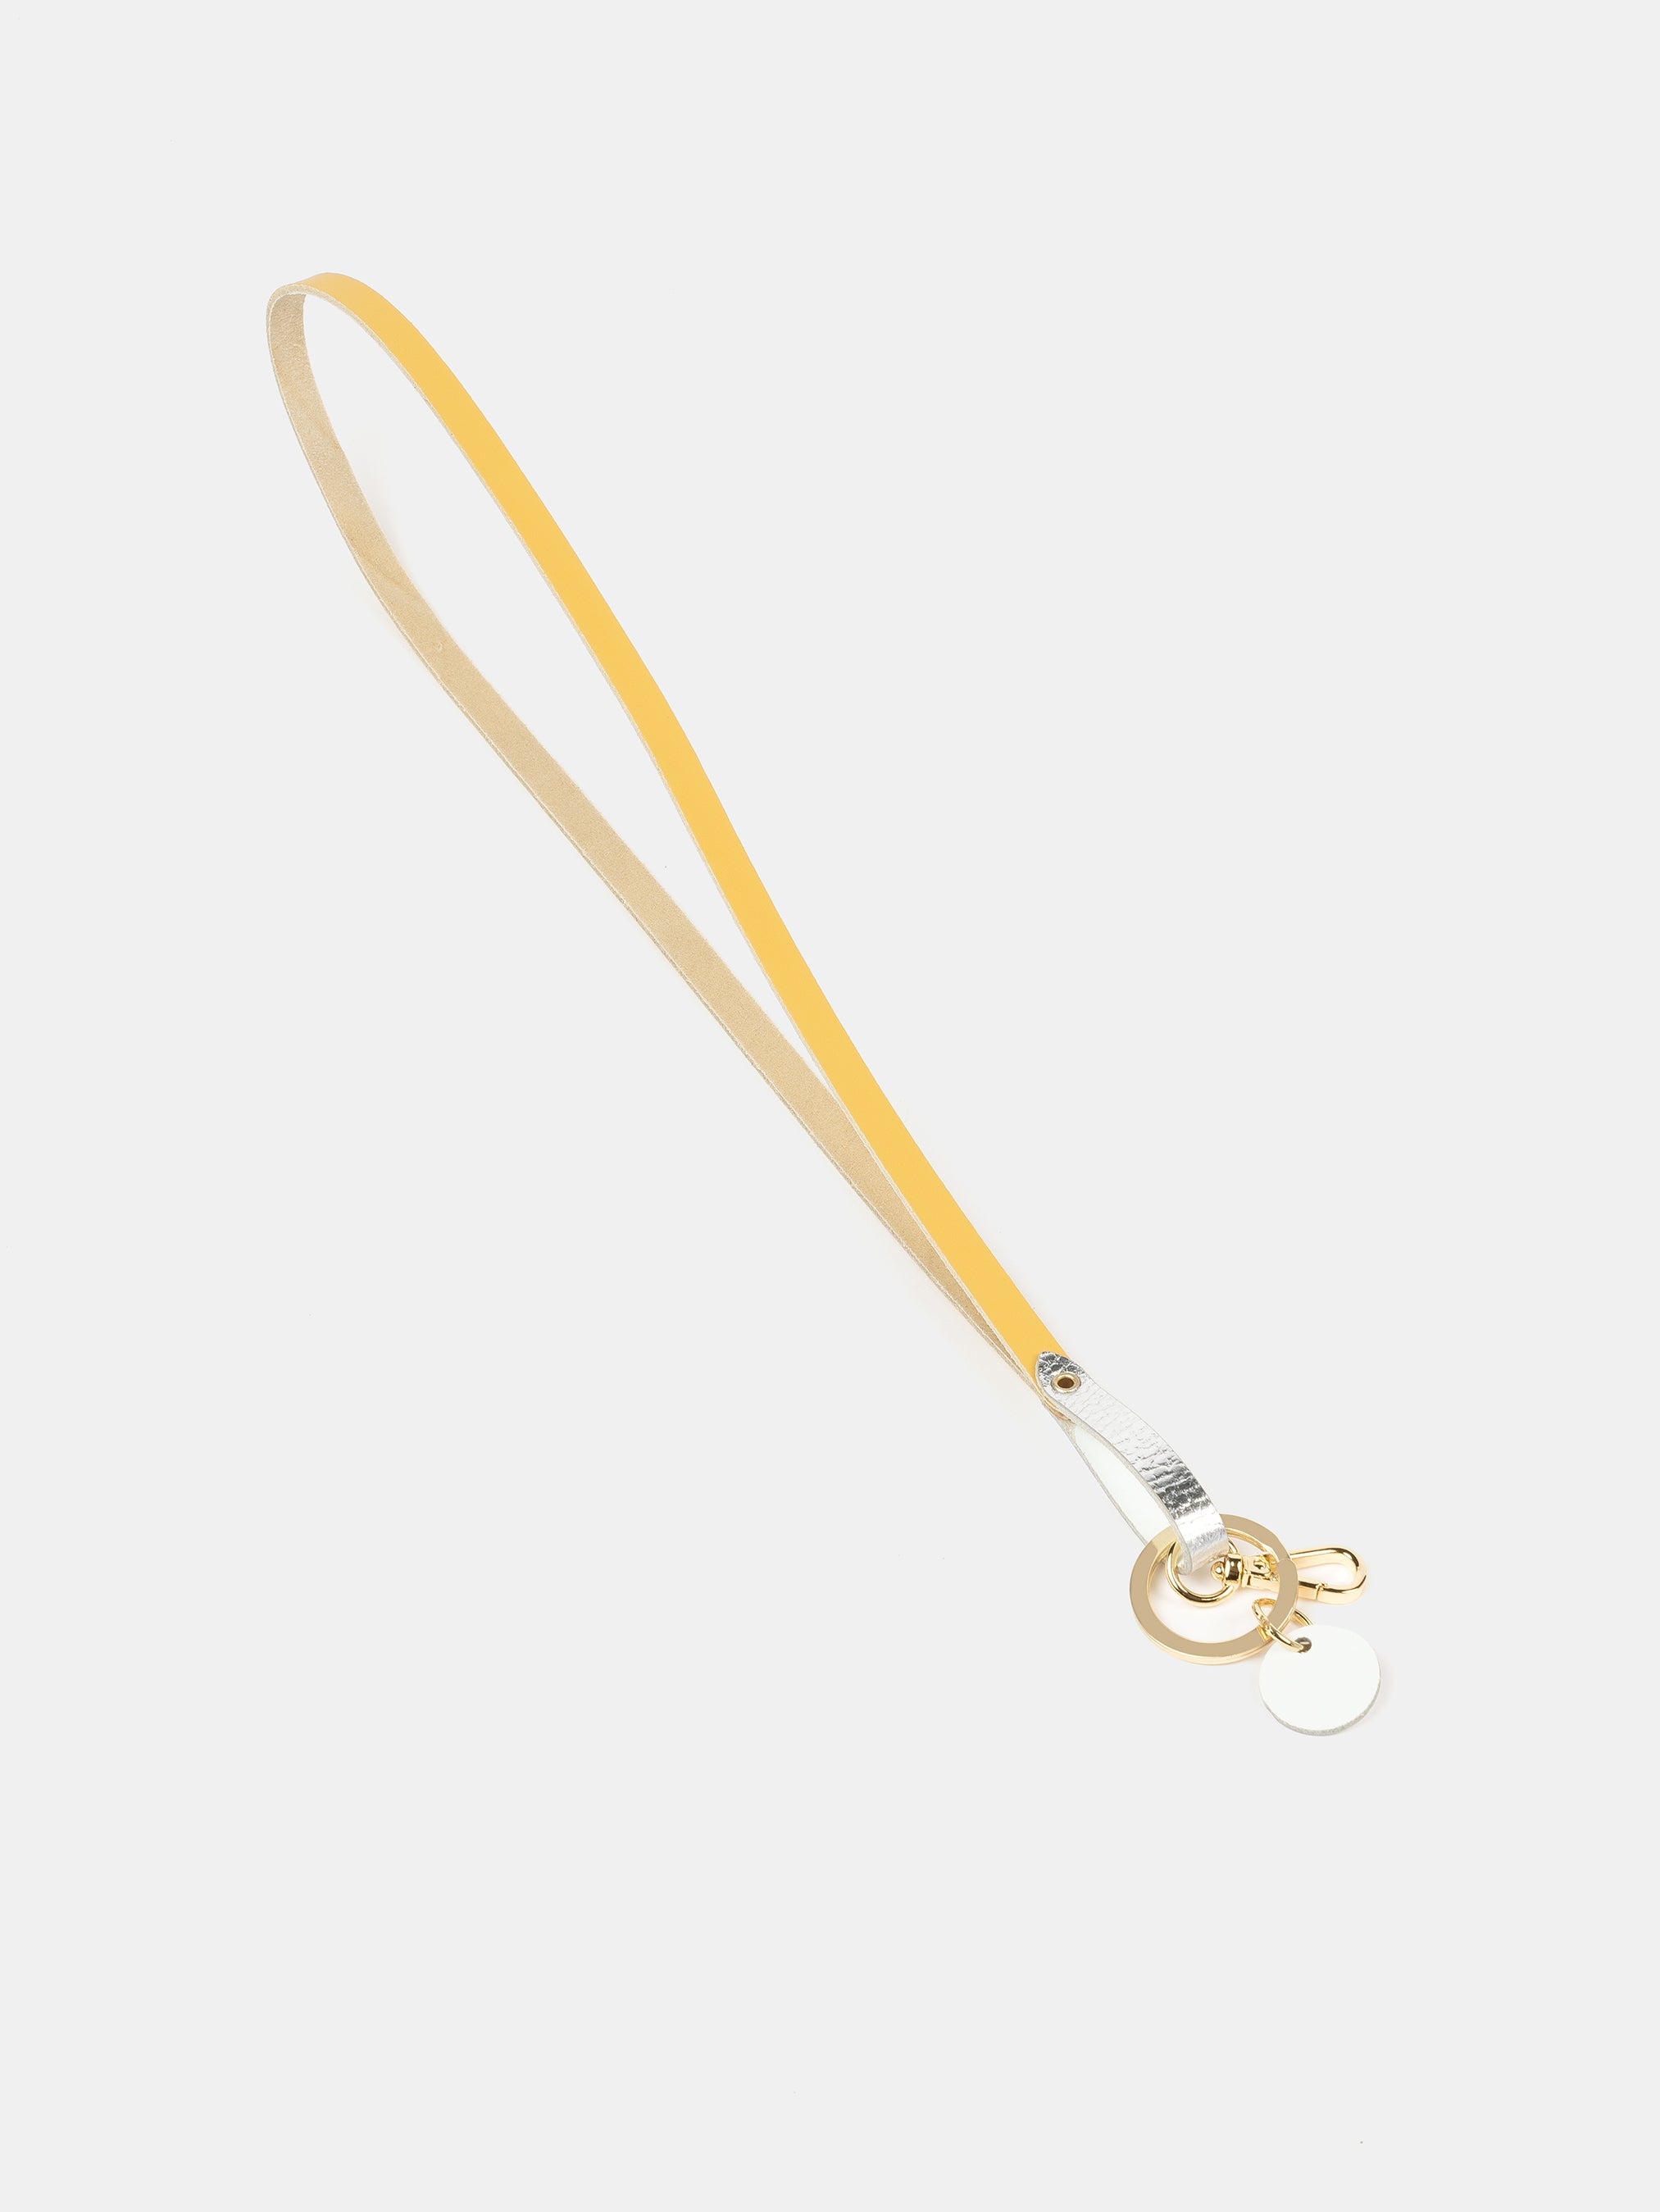 The Lanyard - Indian Yellow & Silver Foil